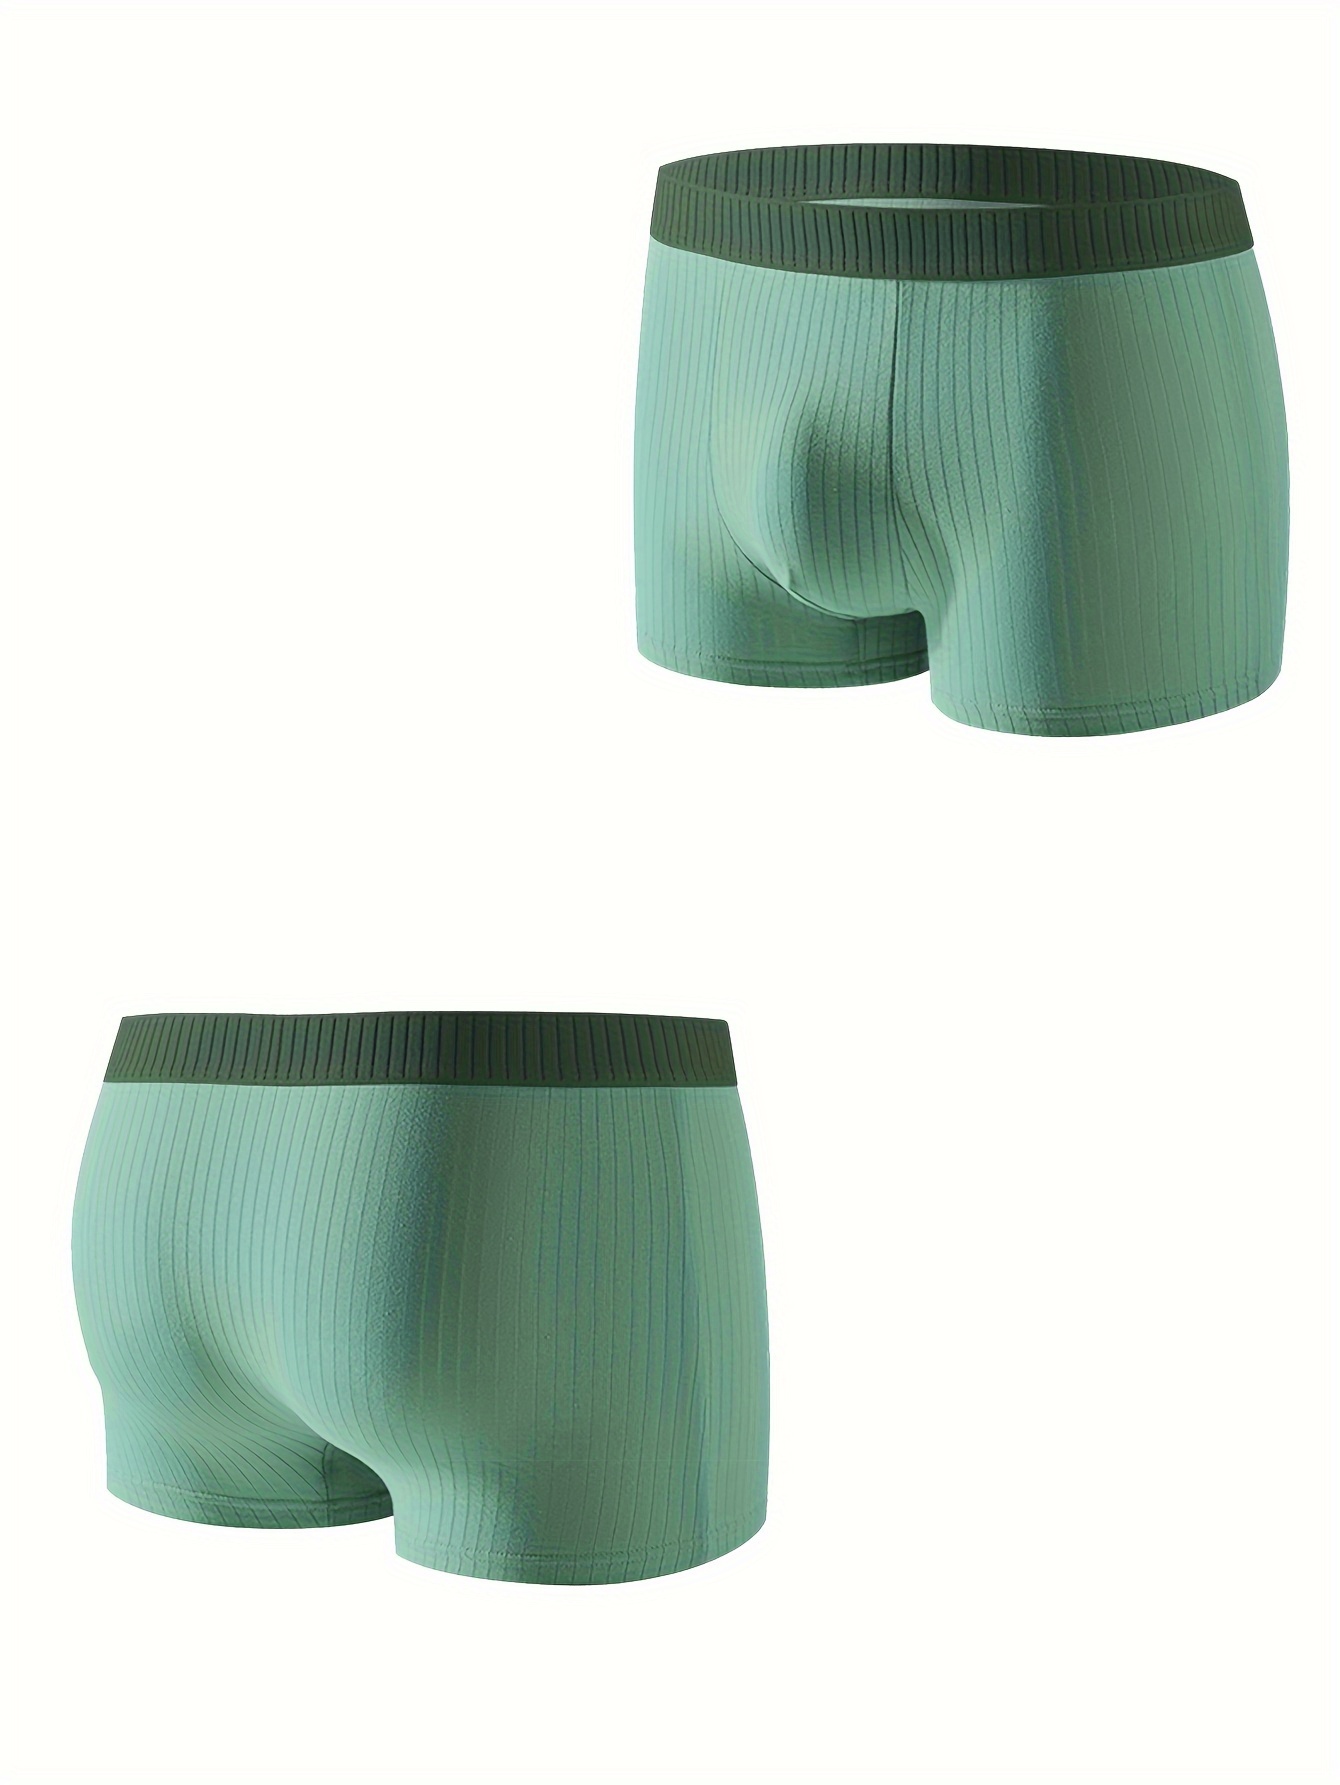 Magnus, Olive Green Bamboo Boxer Briefs, In stock!